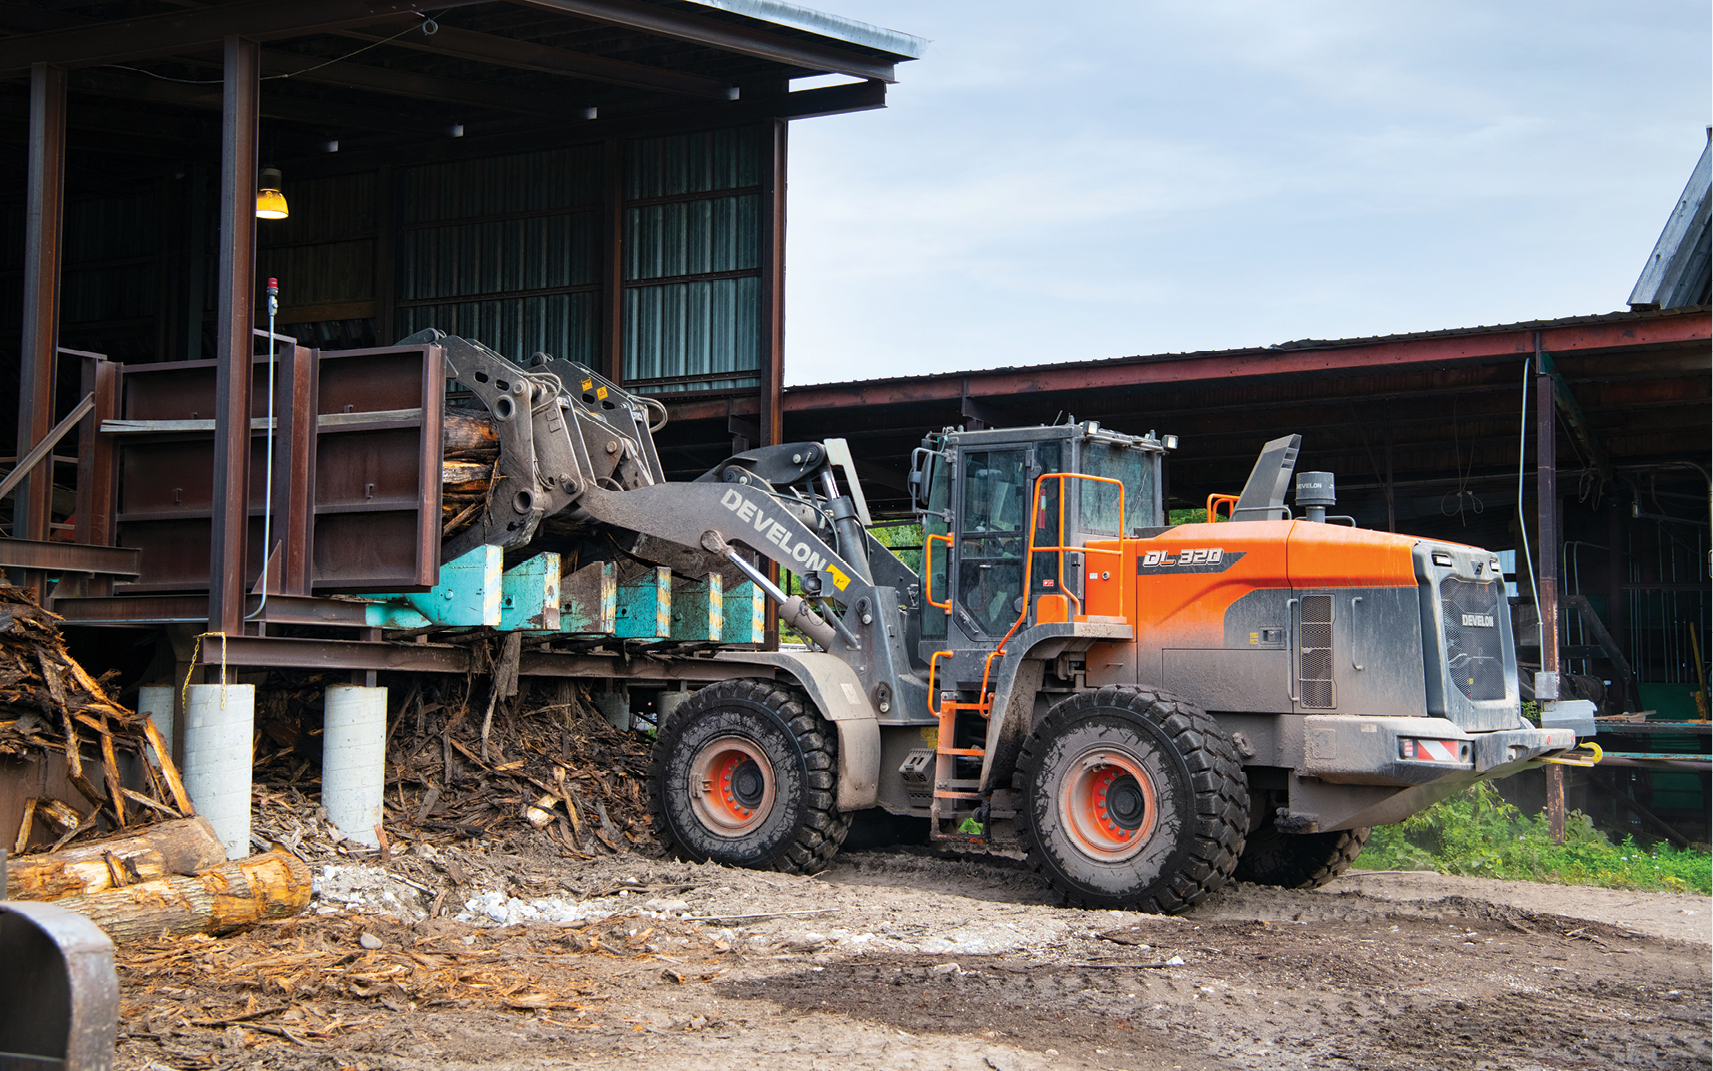 A DEVELON wheel loader operator unloads a stack of logs with a grapple attachment.